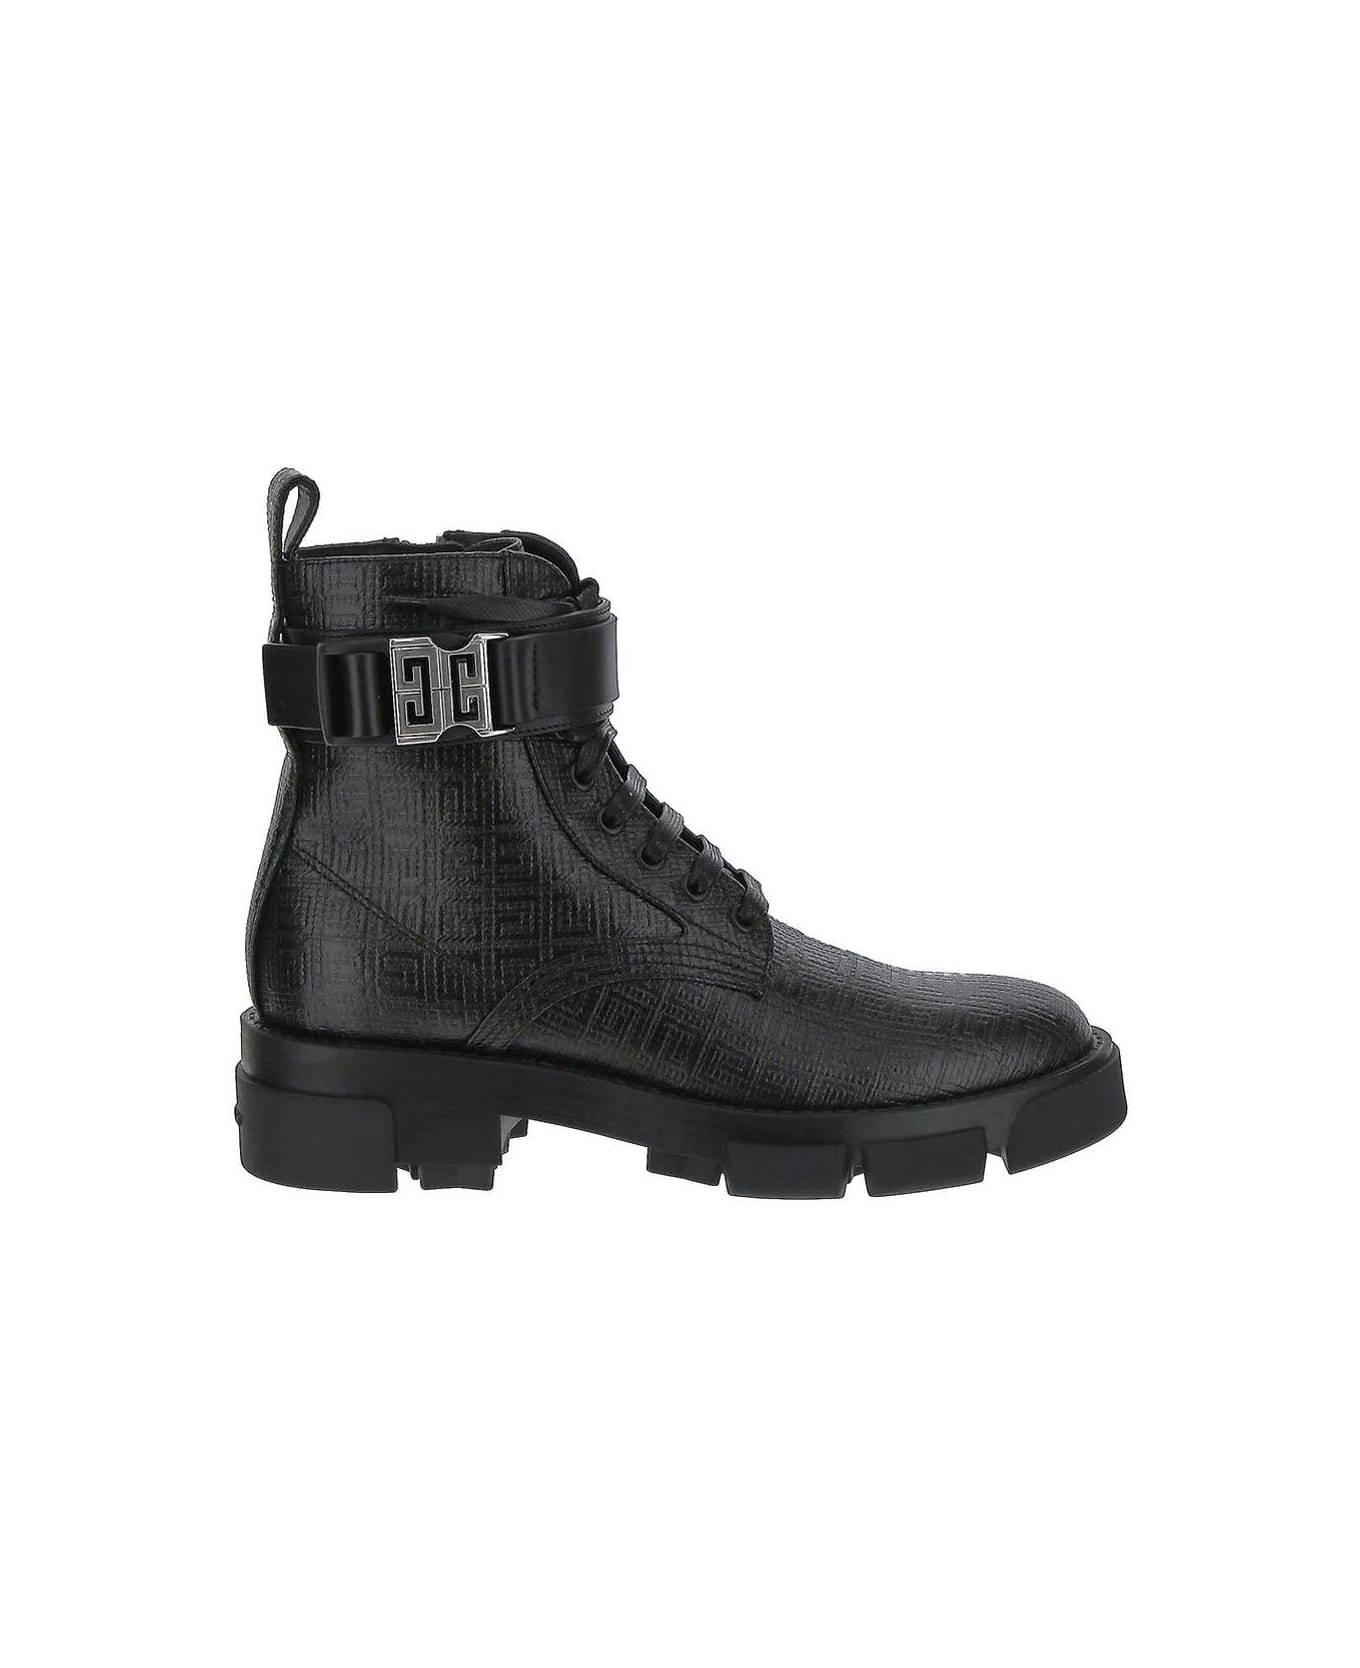 Givenchy Terra Boots - Black ブーツ